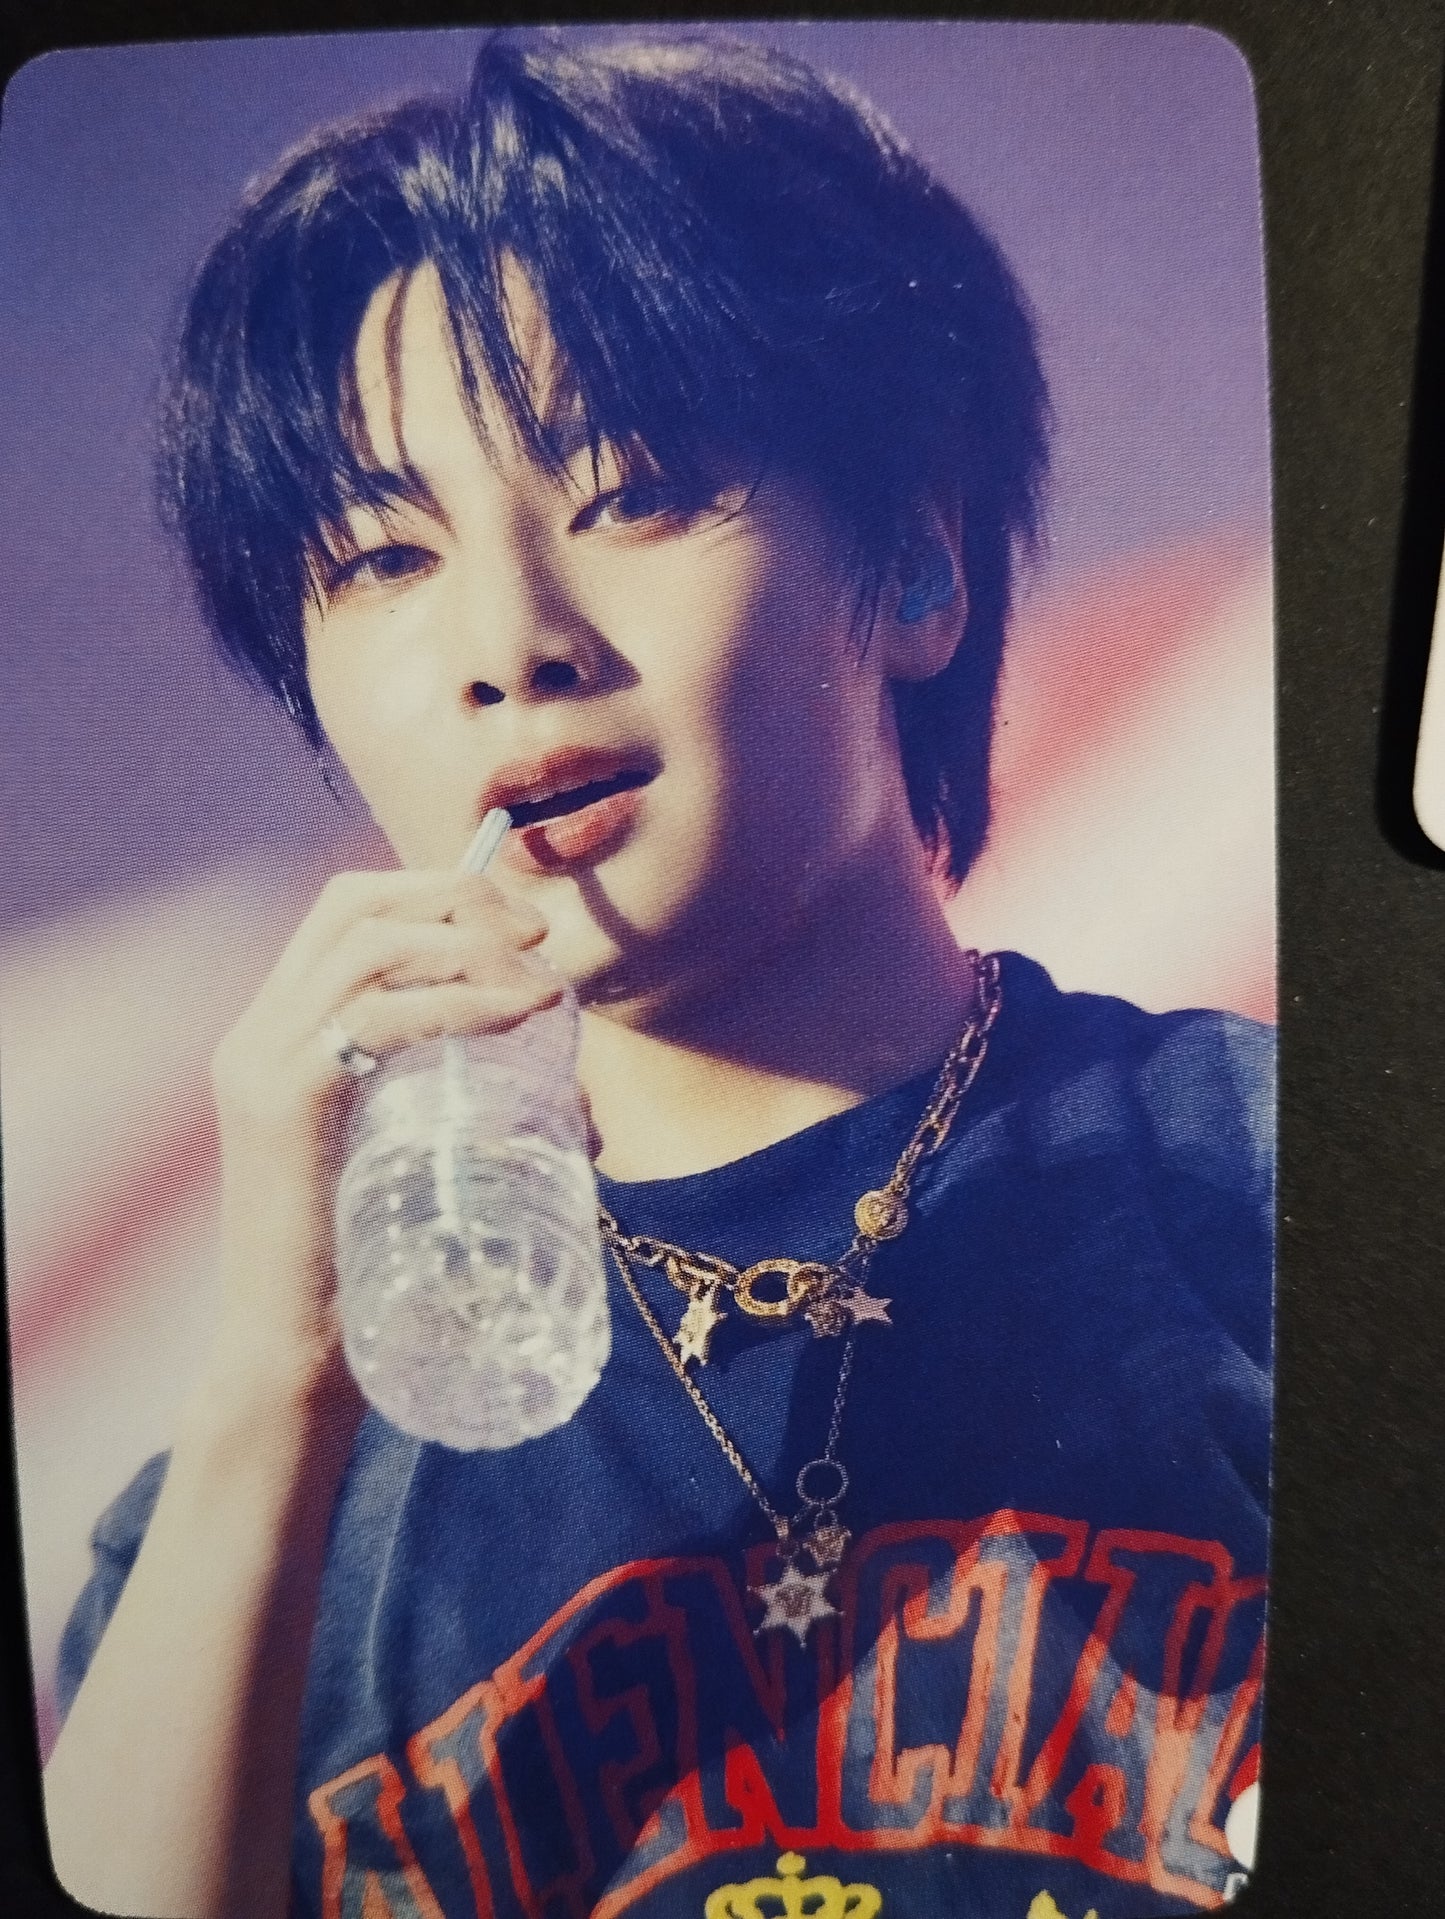 Photocard   STRAYKIDS Social path/Super bowl Jeong in